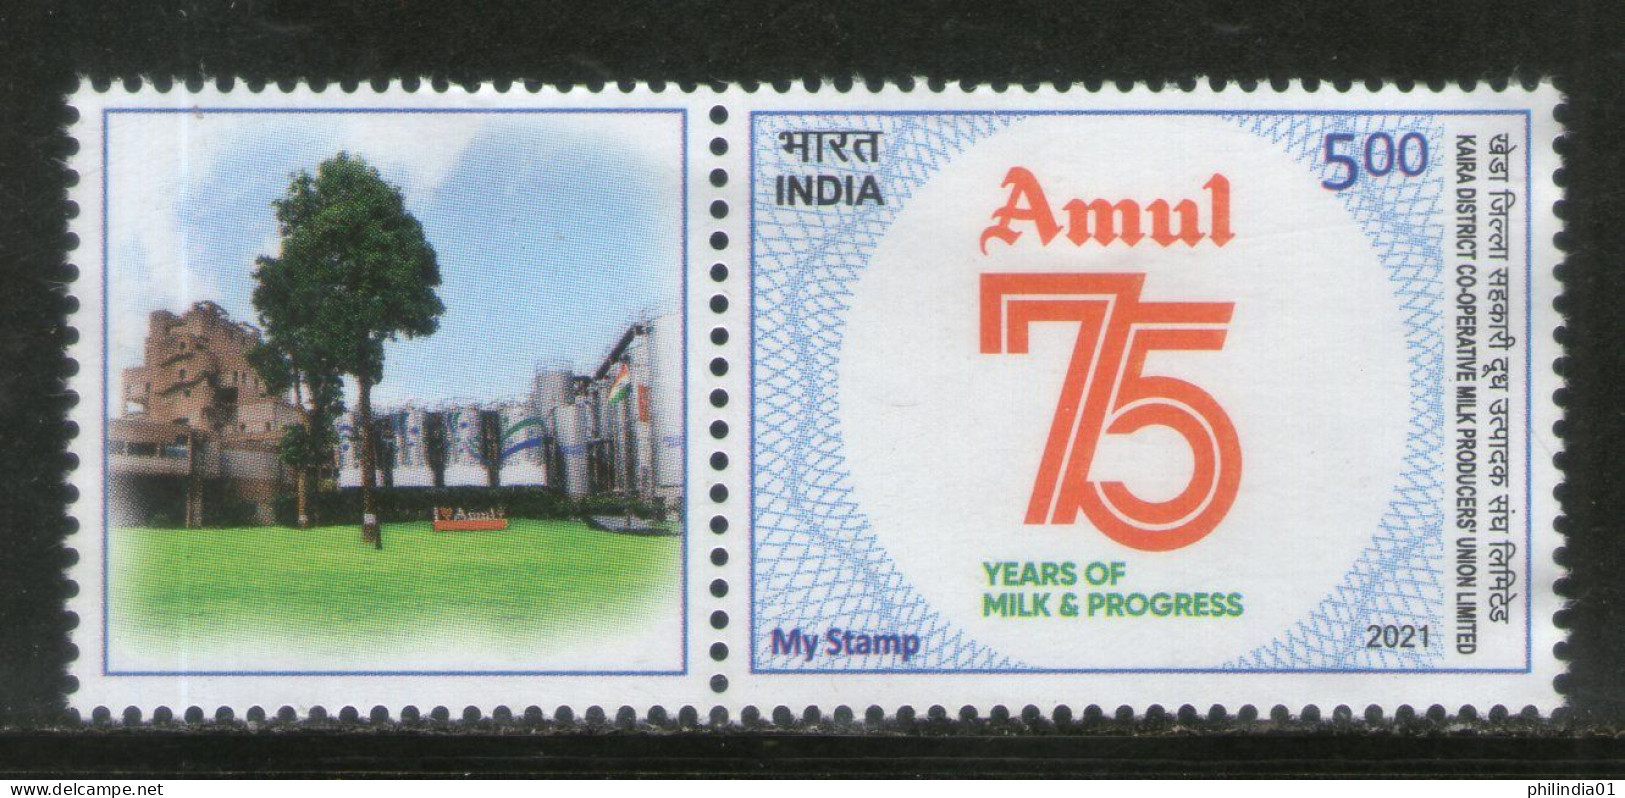 India 2021 Amul 75 Years Of Milk & Progress My Stamp MNH MNH # M96 - Factories & Industries